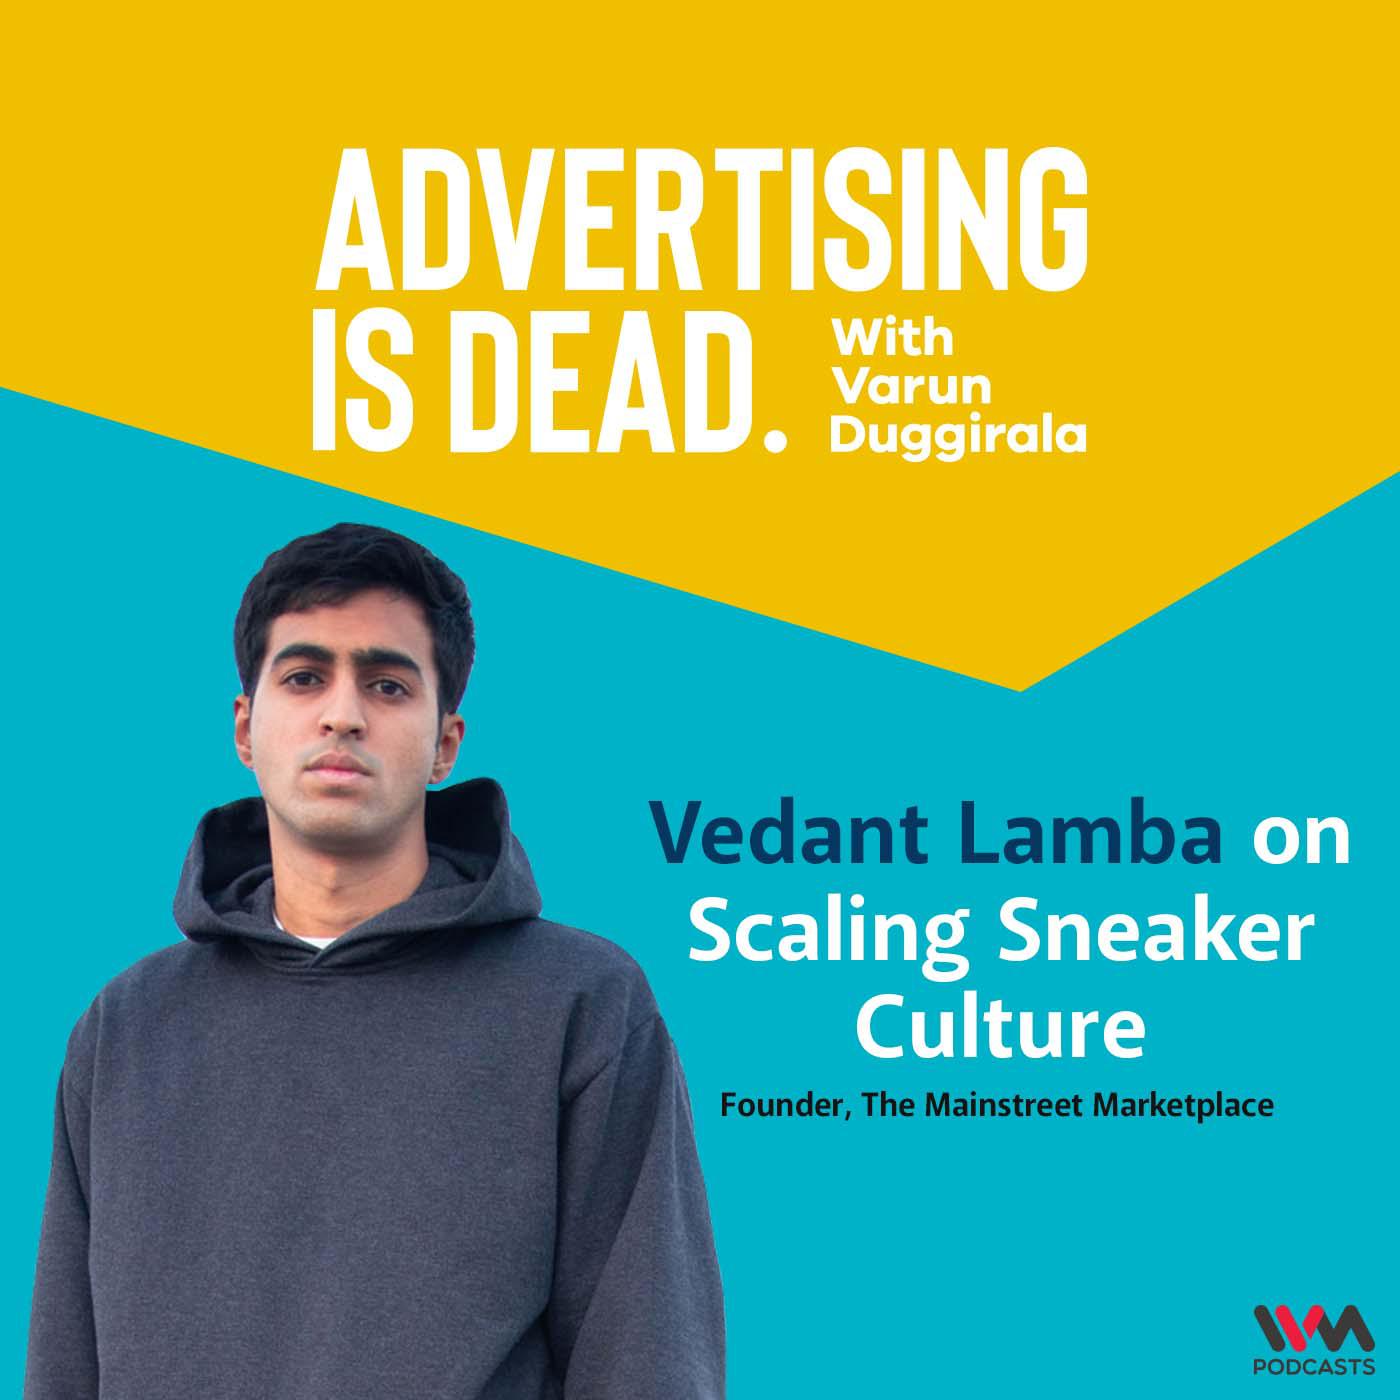 Vedant Lamba on Scaling Sneaker Culture